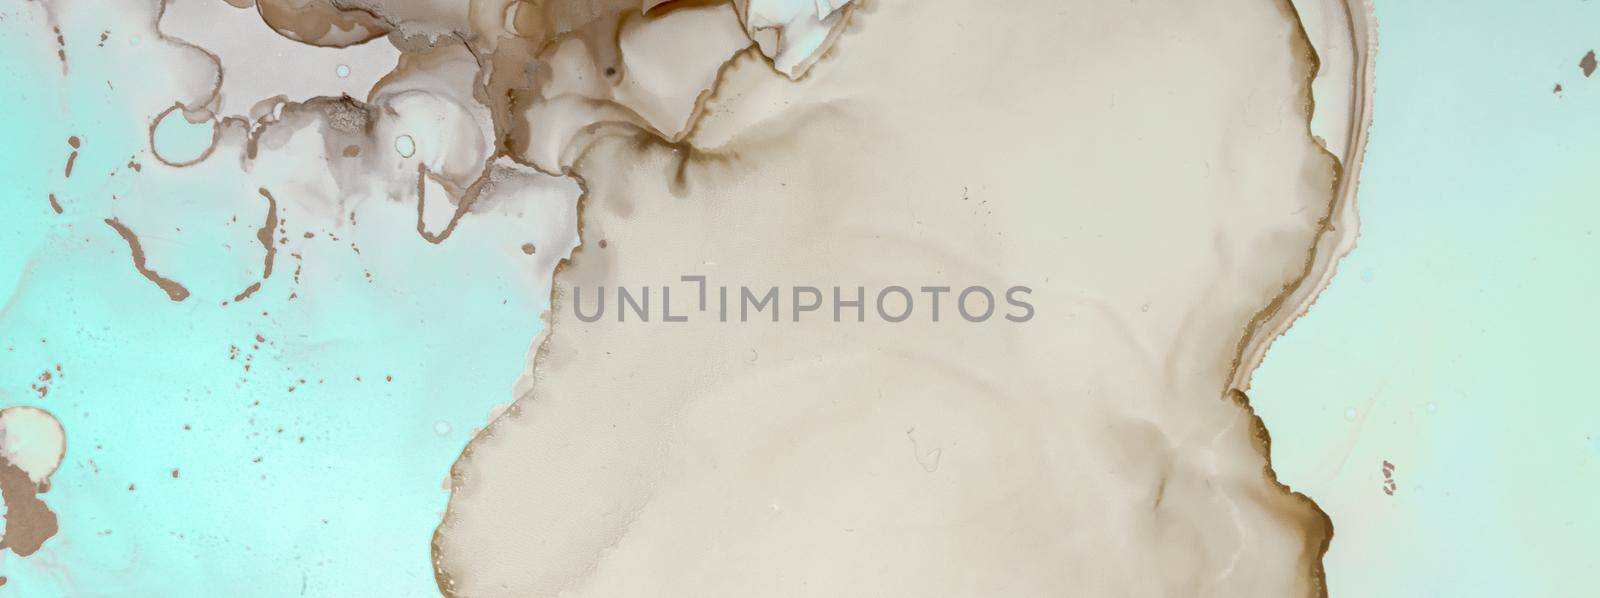 Color Ocean Water. Abstract Watercolor Marble Texture. Blue Ocean Abstract. on Canvas. Hand Painted Trendy Sea Splash. Ocean Waves. Turquoise Liquid Design. Green Art Background. Alcohol Inks